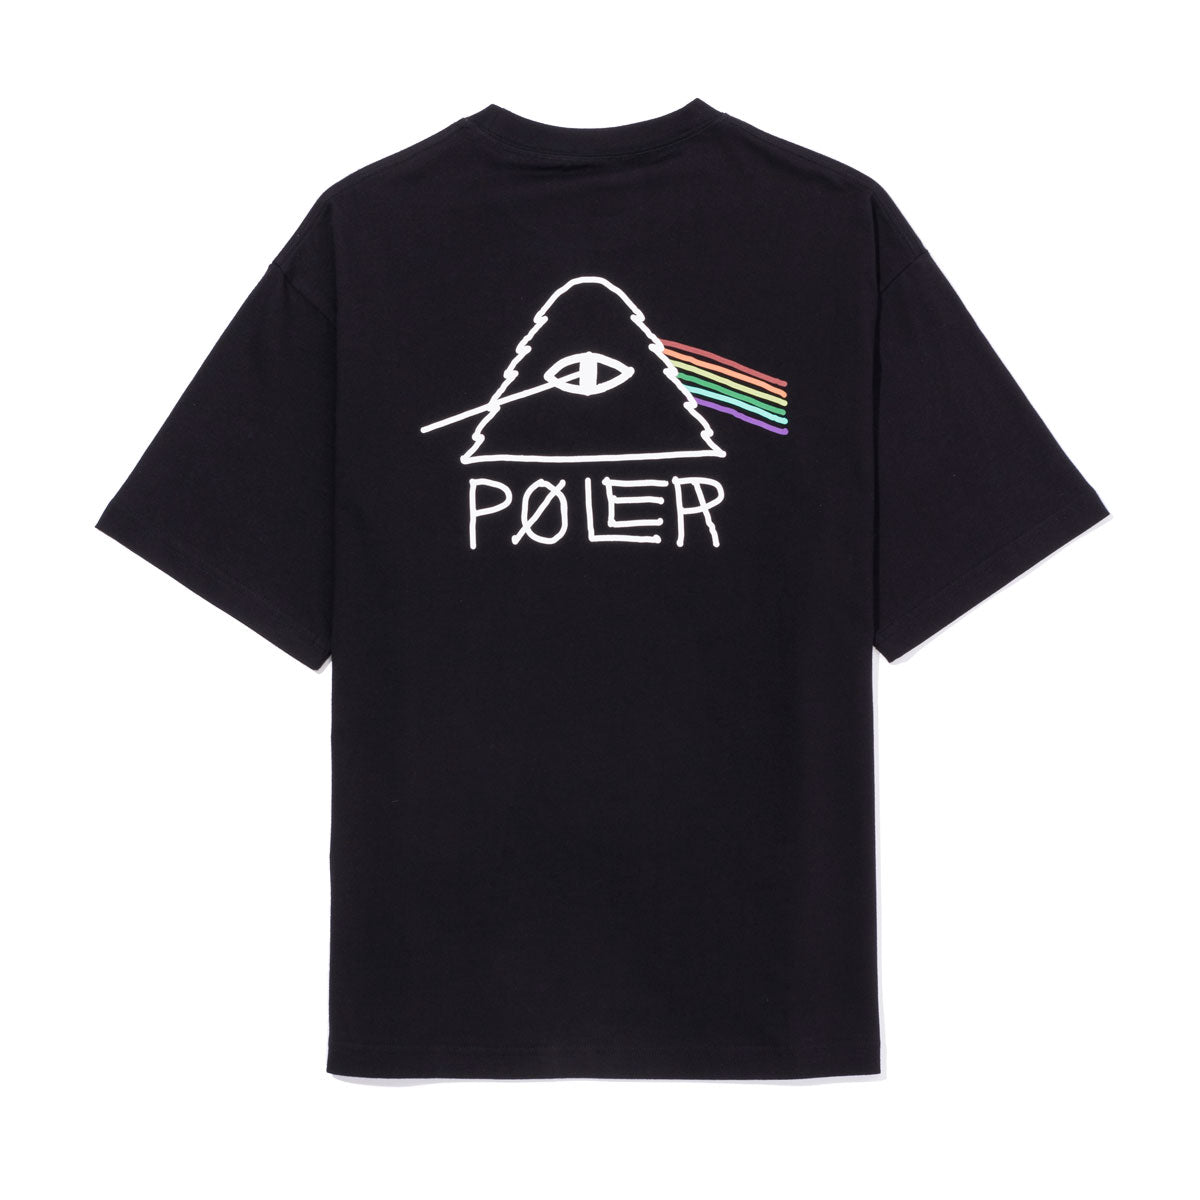 POLER PSYCHEDELIC RELAX FIT TEE(BLACK)(ポーラー サイケデリック リラックスフィット ティー)